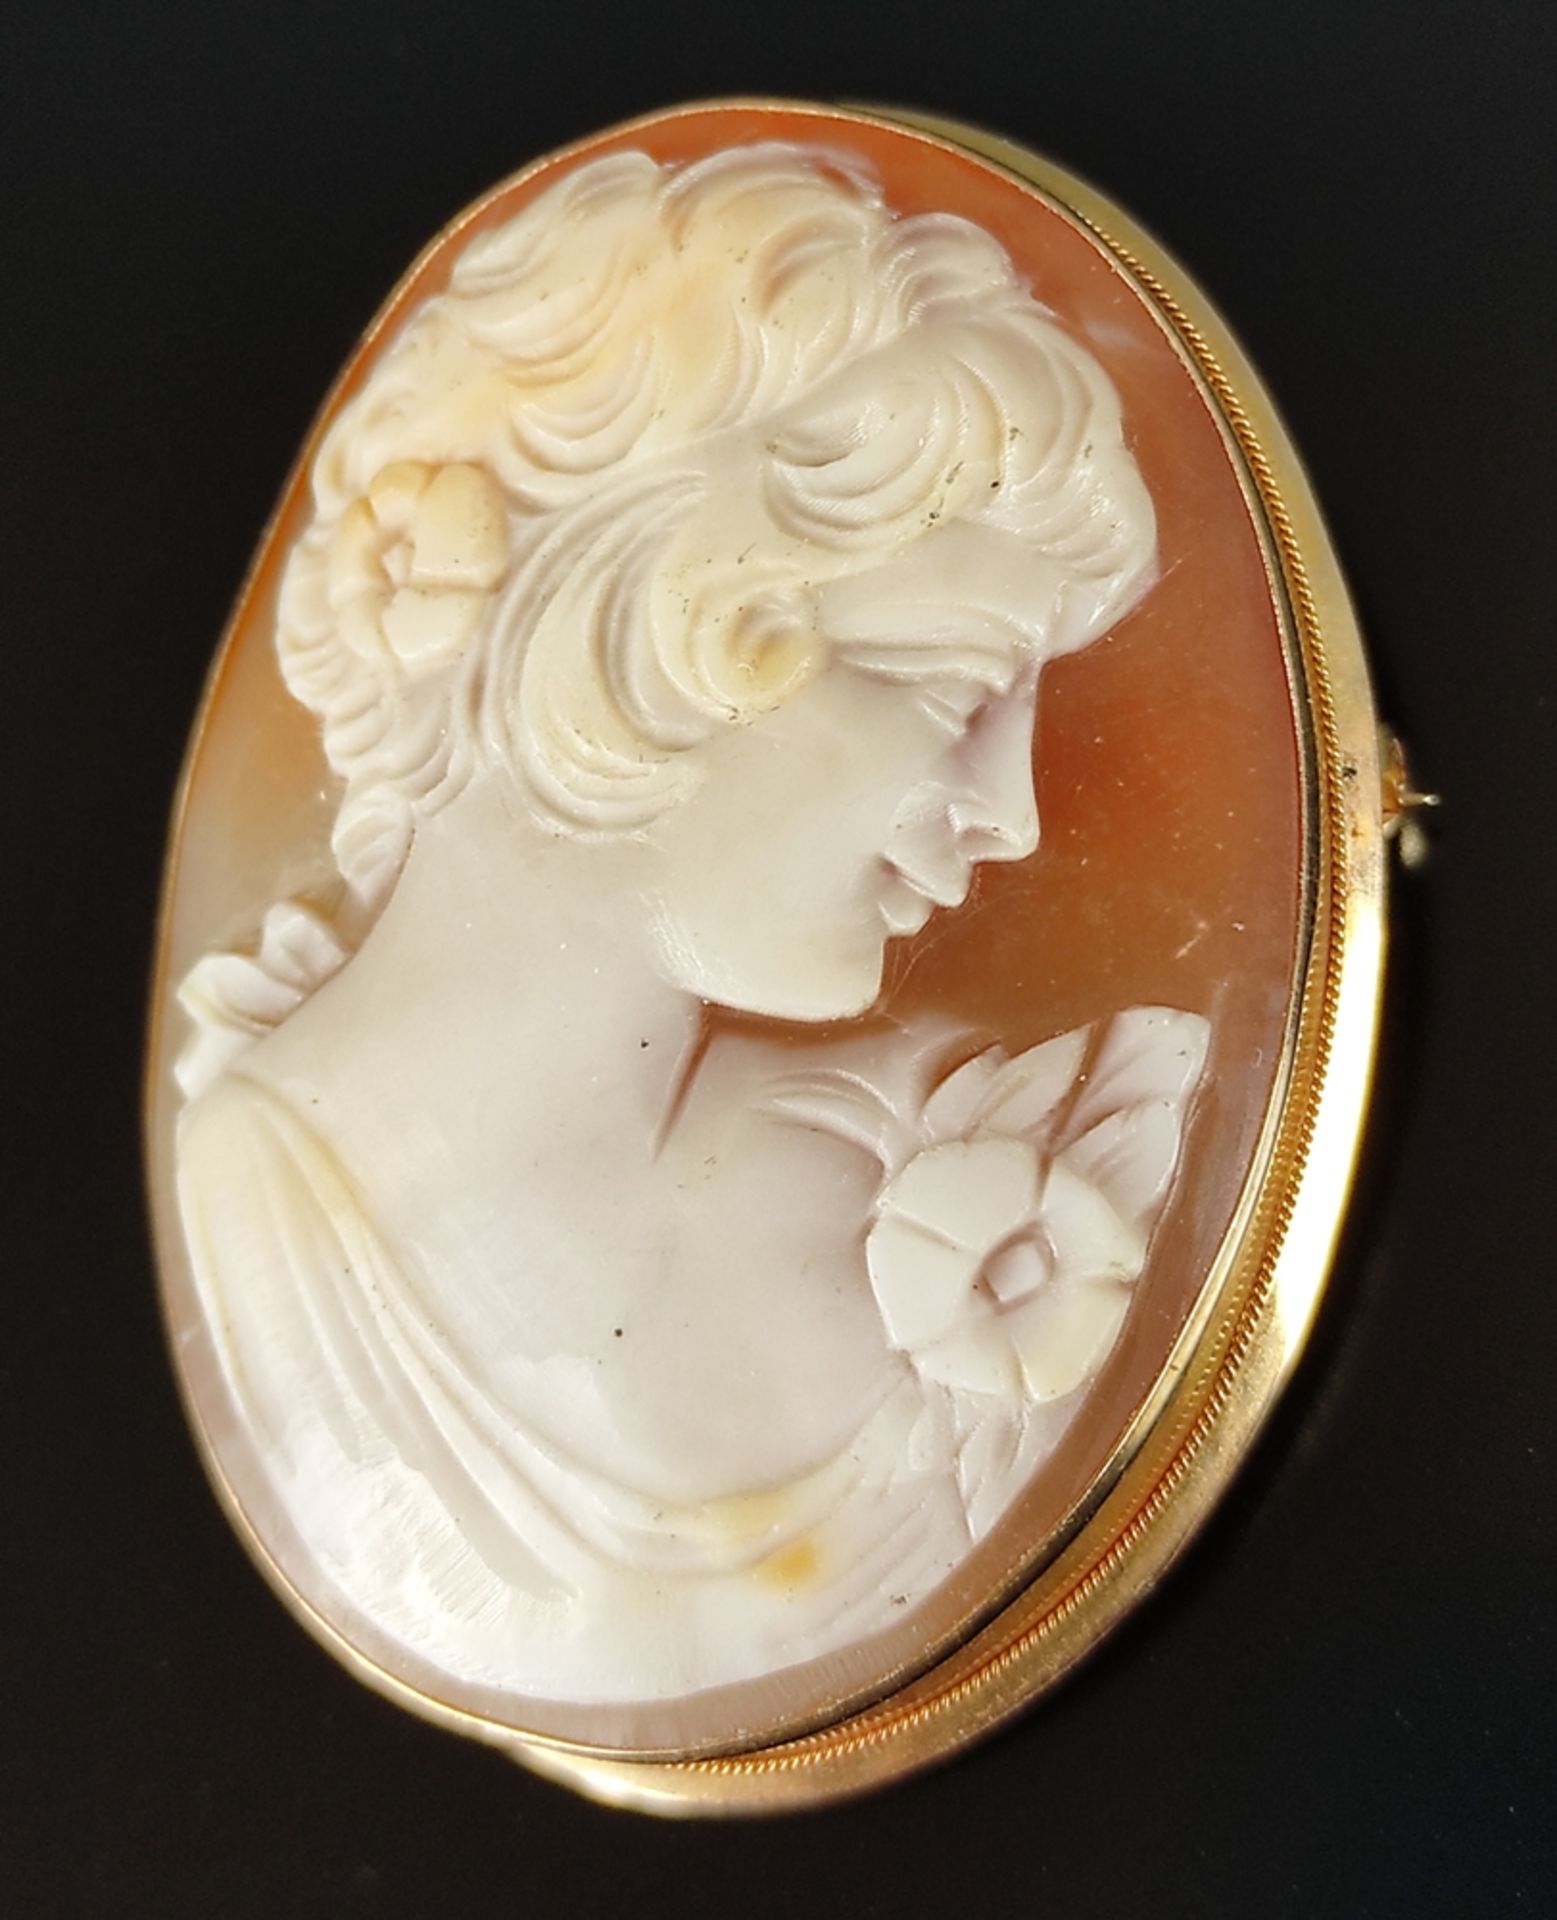 Shell cameo pendant/brooch, with girl profile, set in 750/18K yellow gold (tested), 19th century, - Image 2 of 4